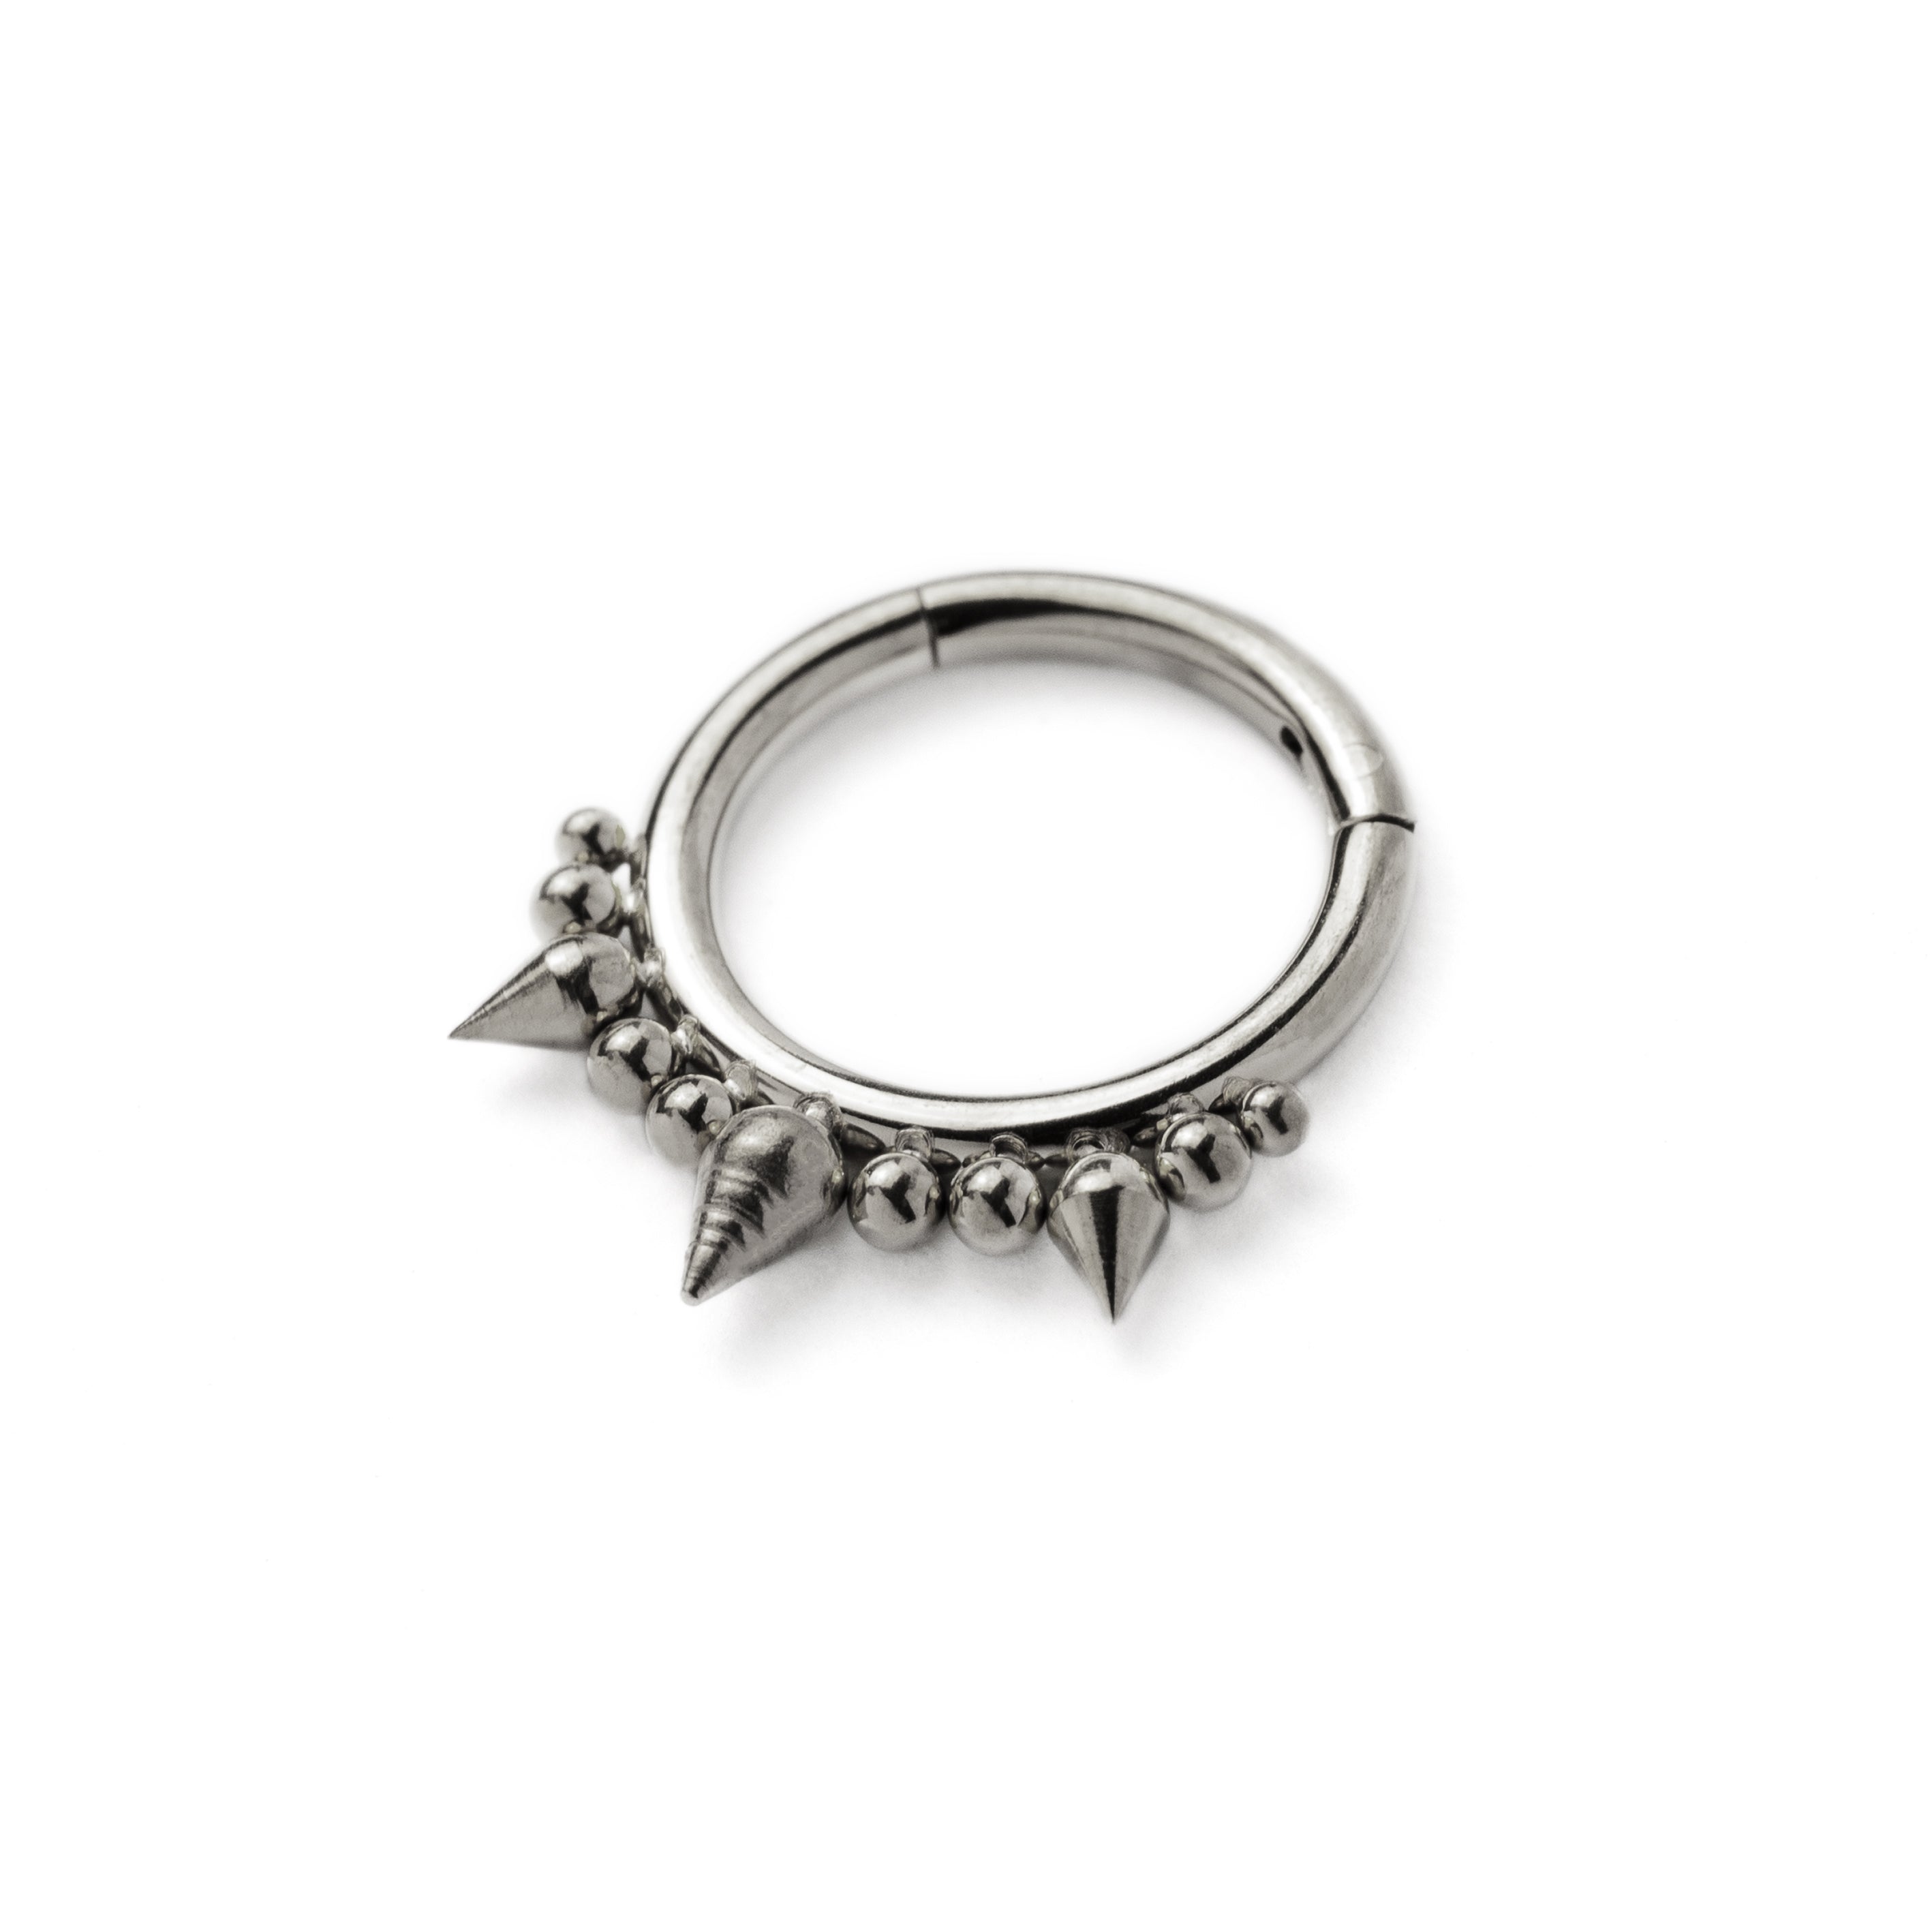 Debra surgical steel septum clicker ring right side view